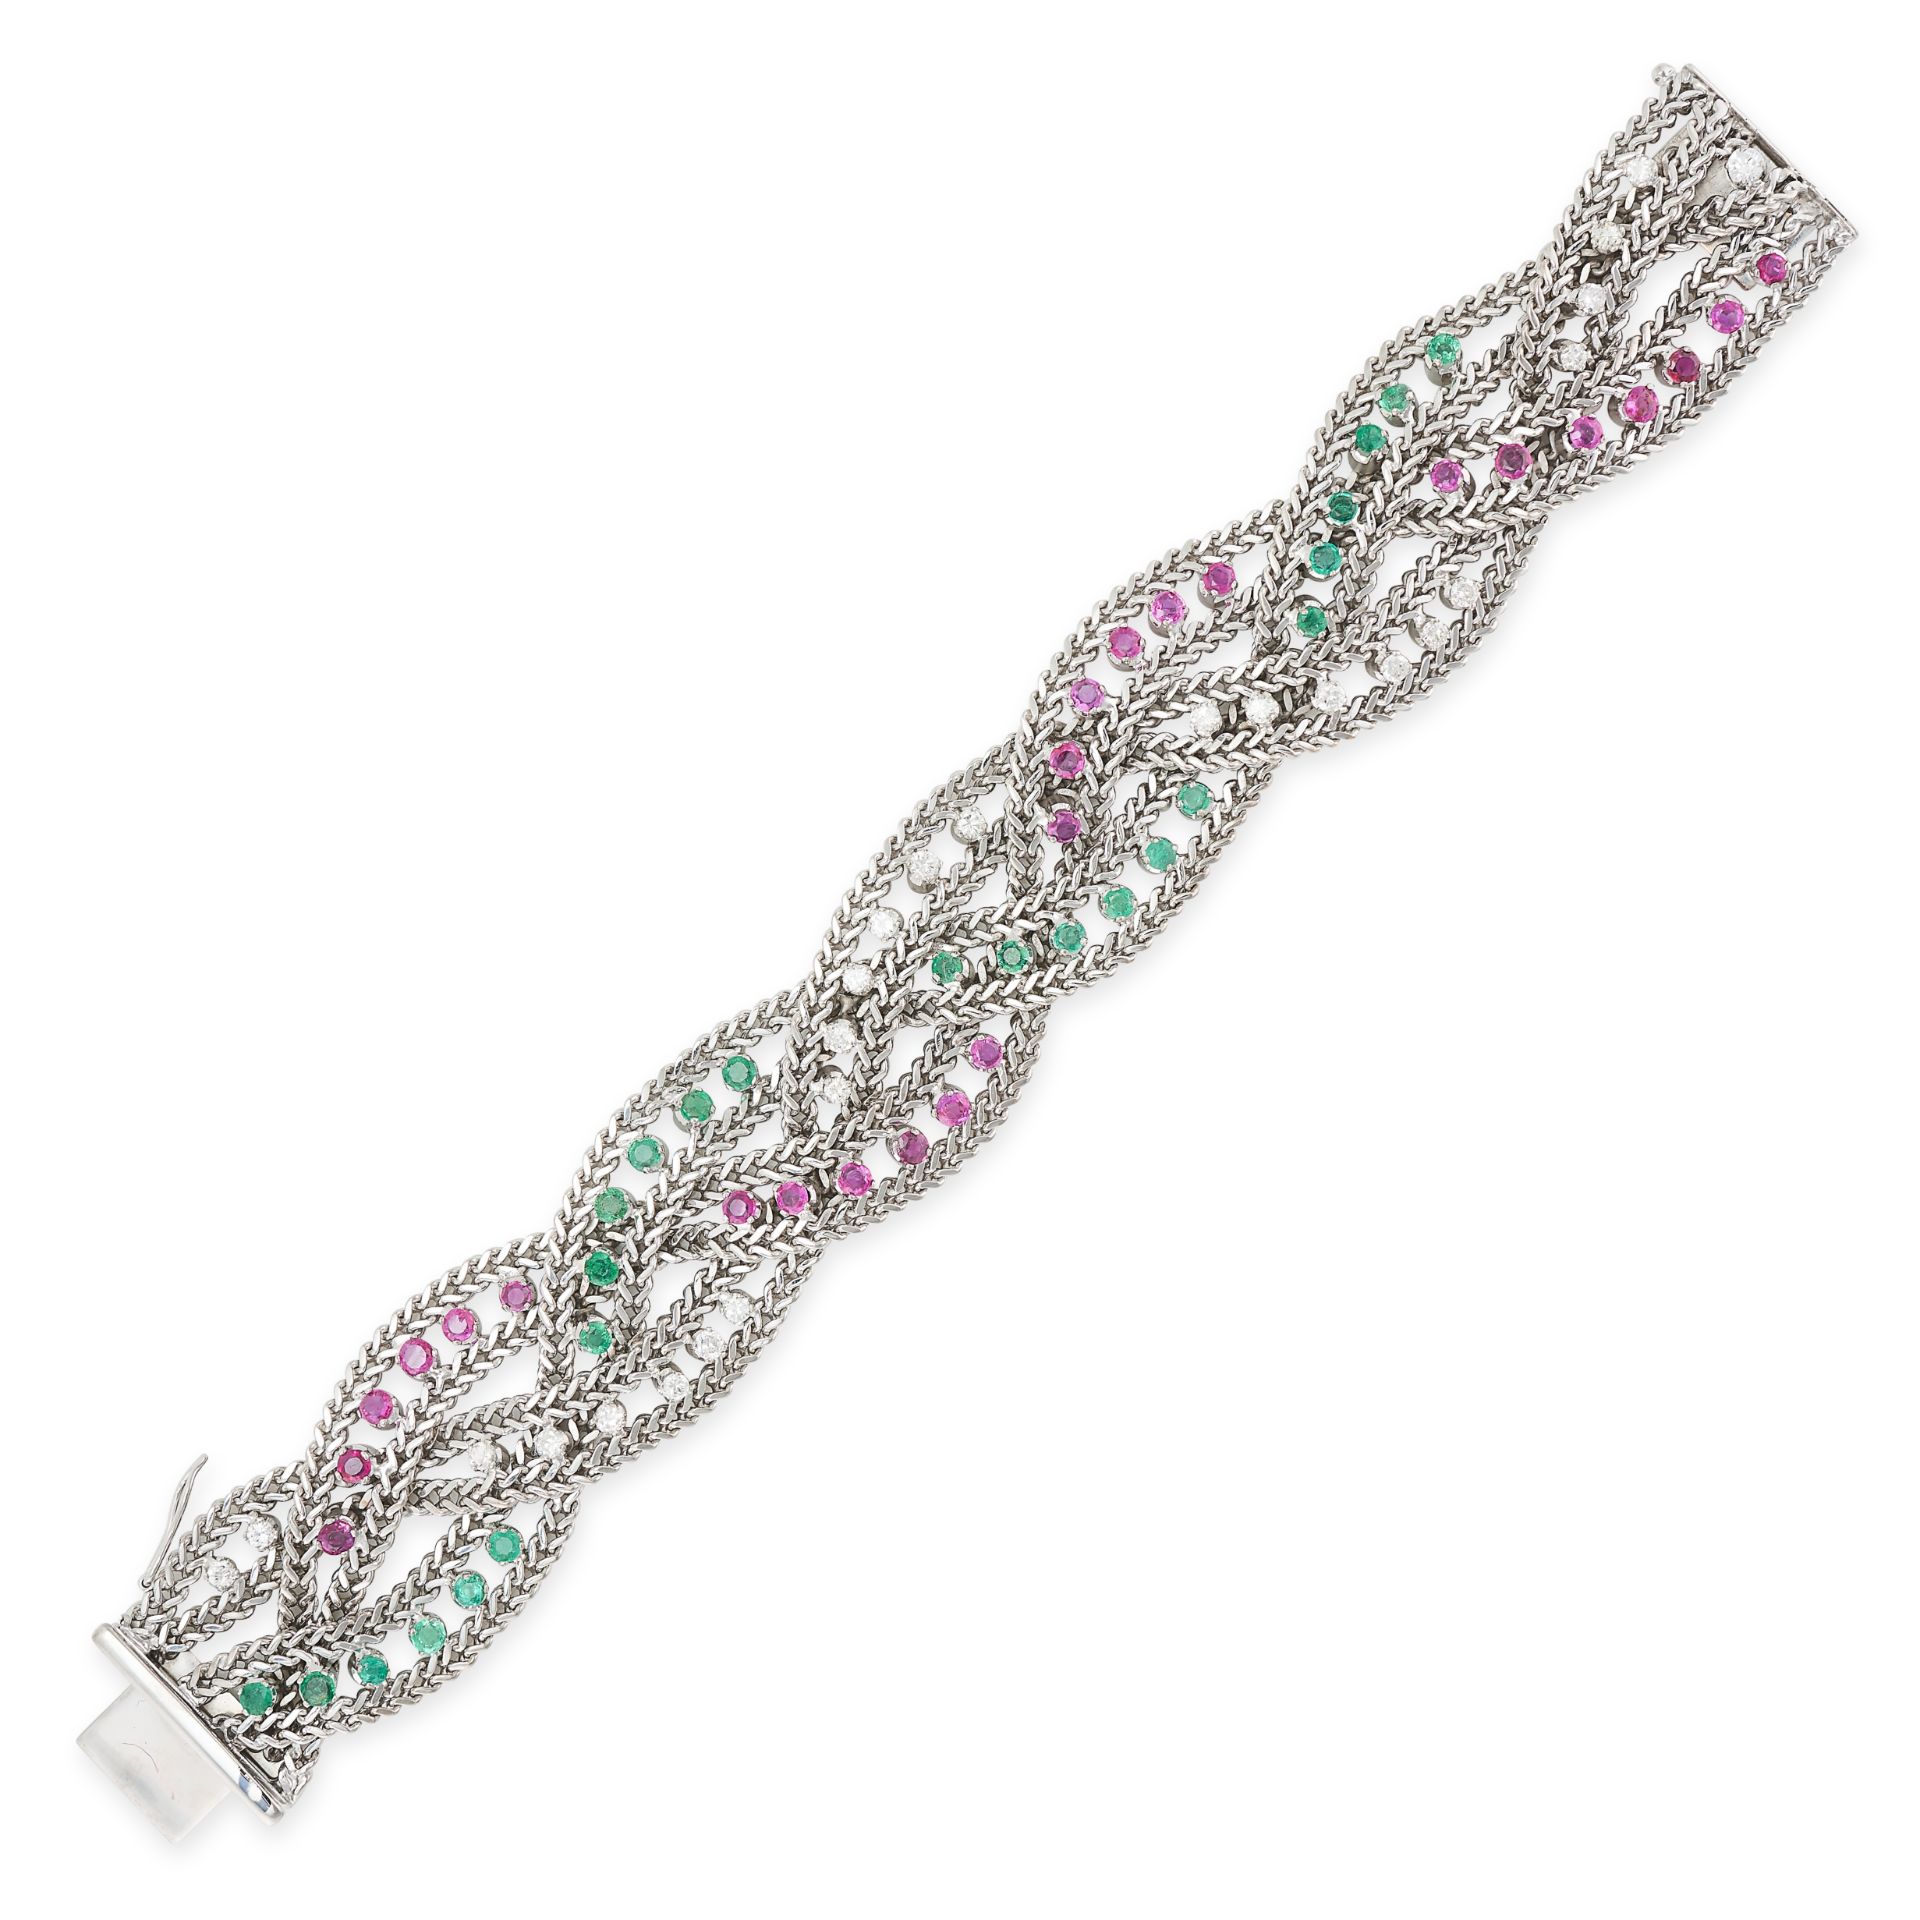 AN EMERALD, RUBY AND DIAMOND BRACELET comprising three braided rows, each set with round brilliant